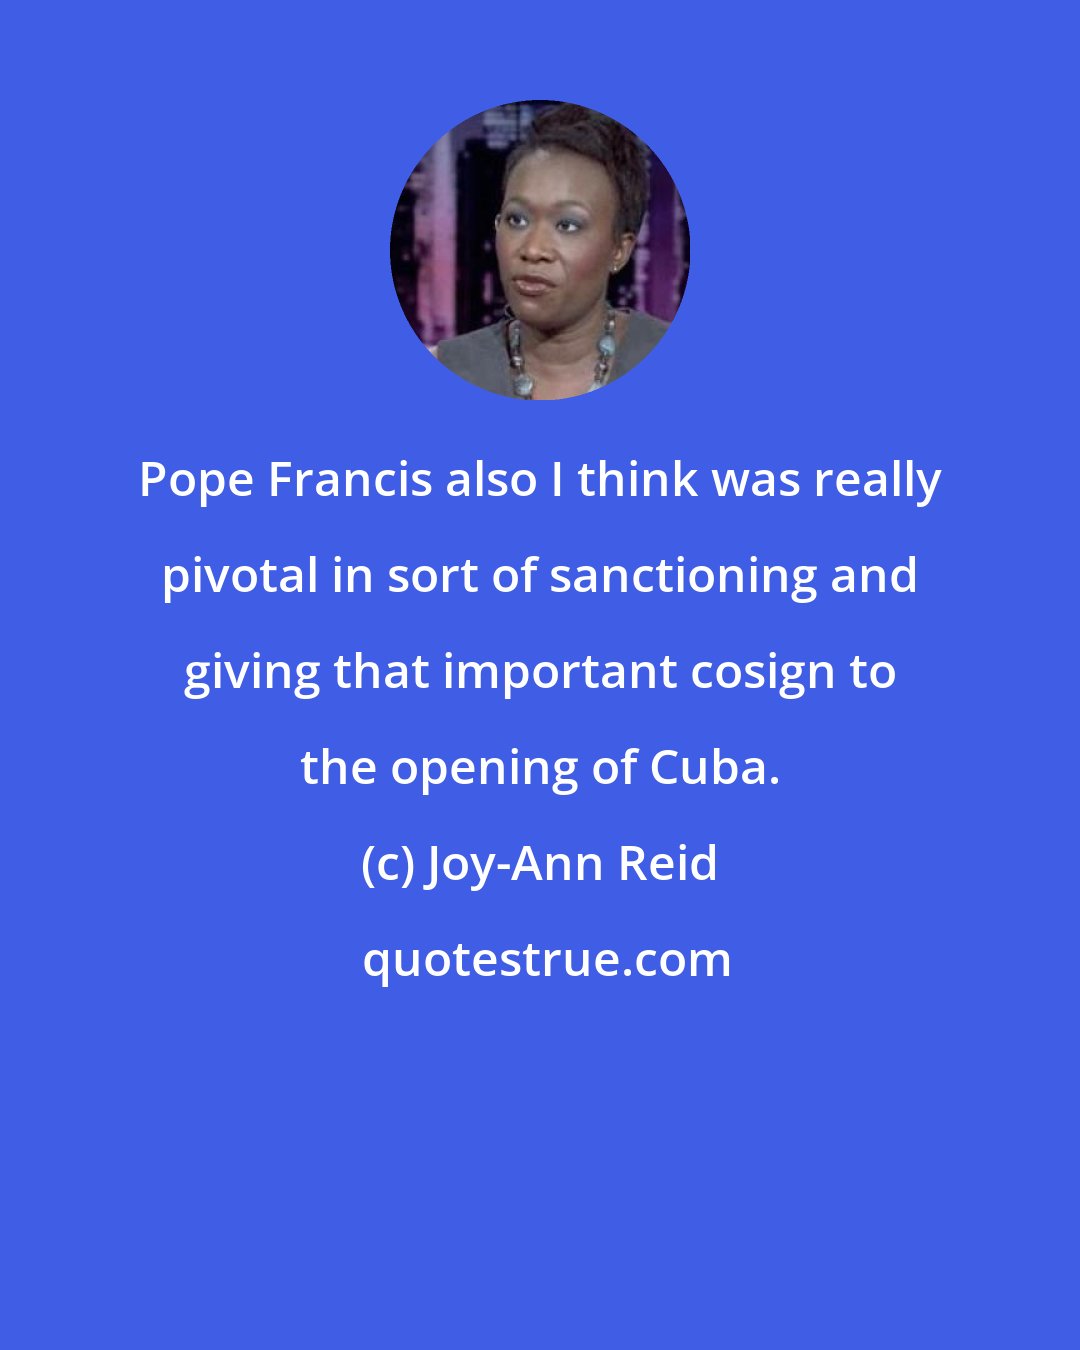 Joy-Ann Reid: Pope Francis also I think was really pivotal in sort of sanctioning and giving that important cosign to the opening of Cuba.